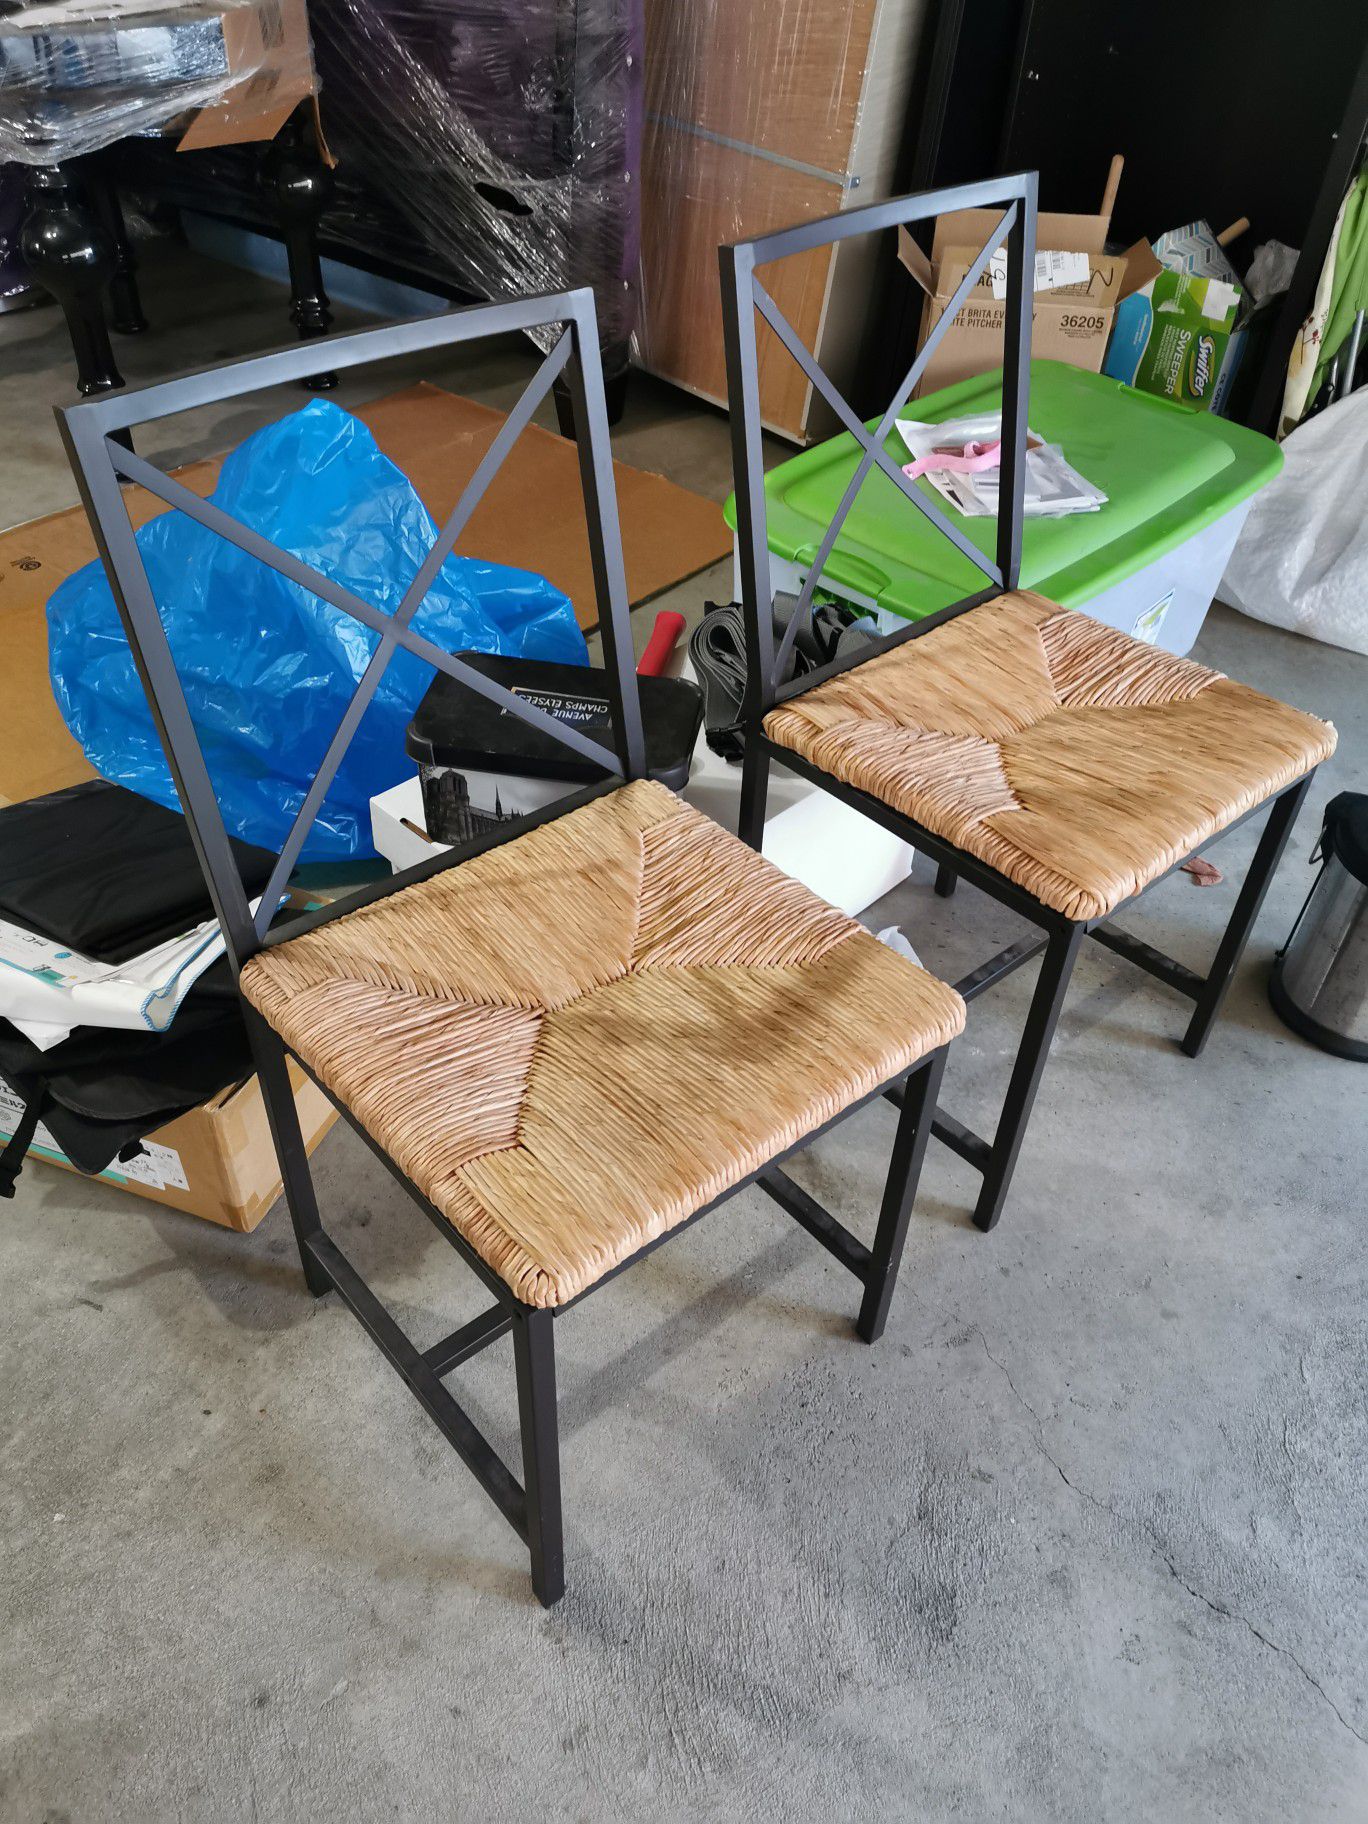 4chairs for free